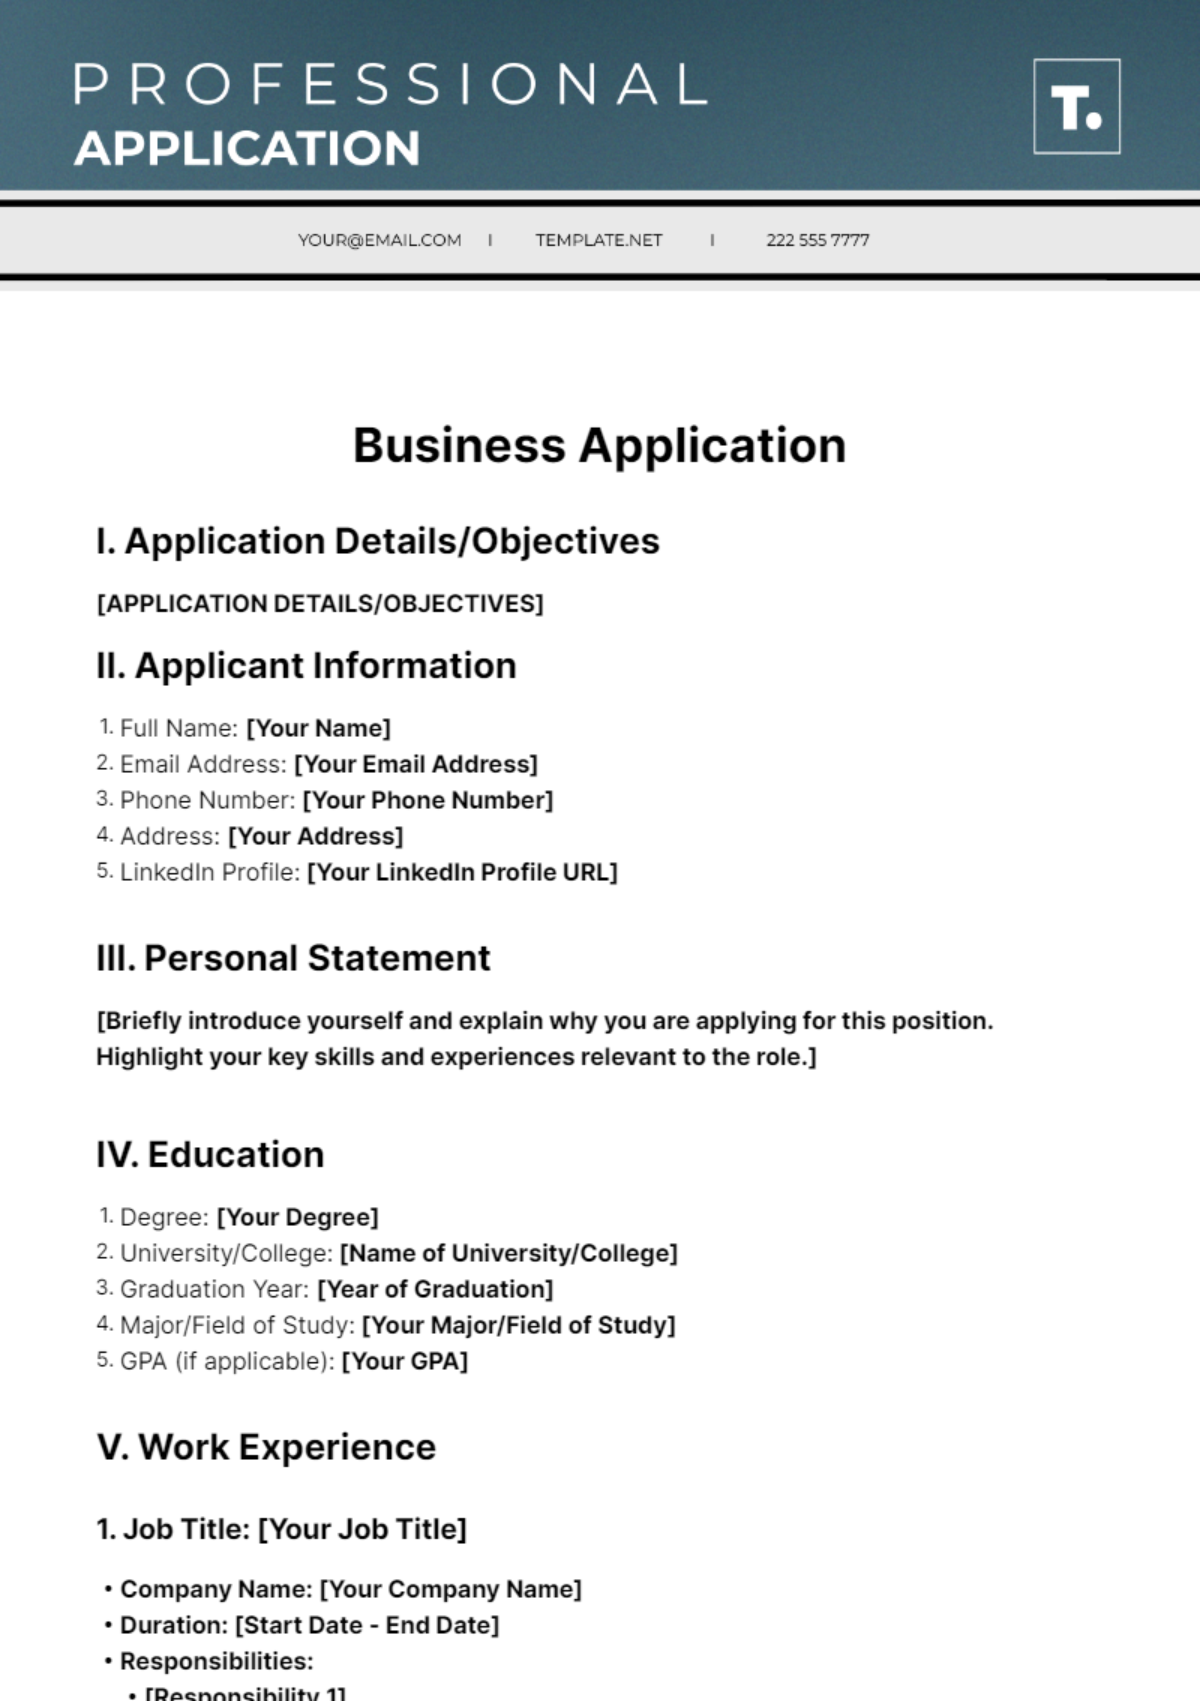 Business Application Template